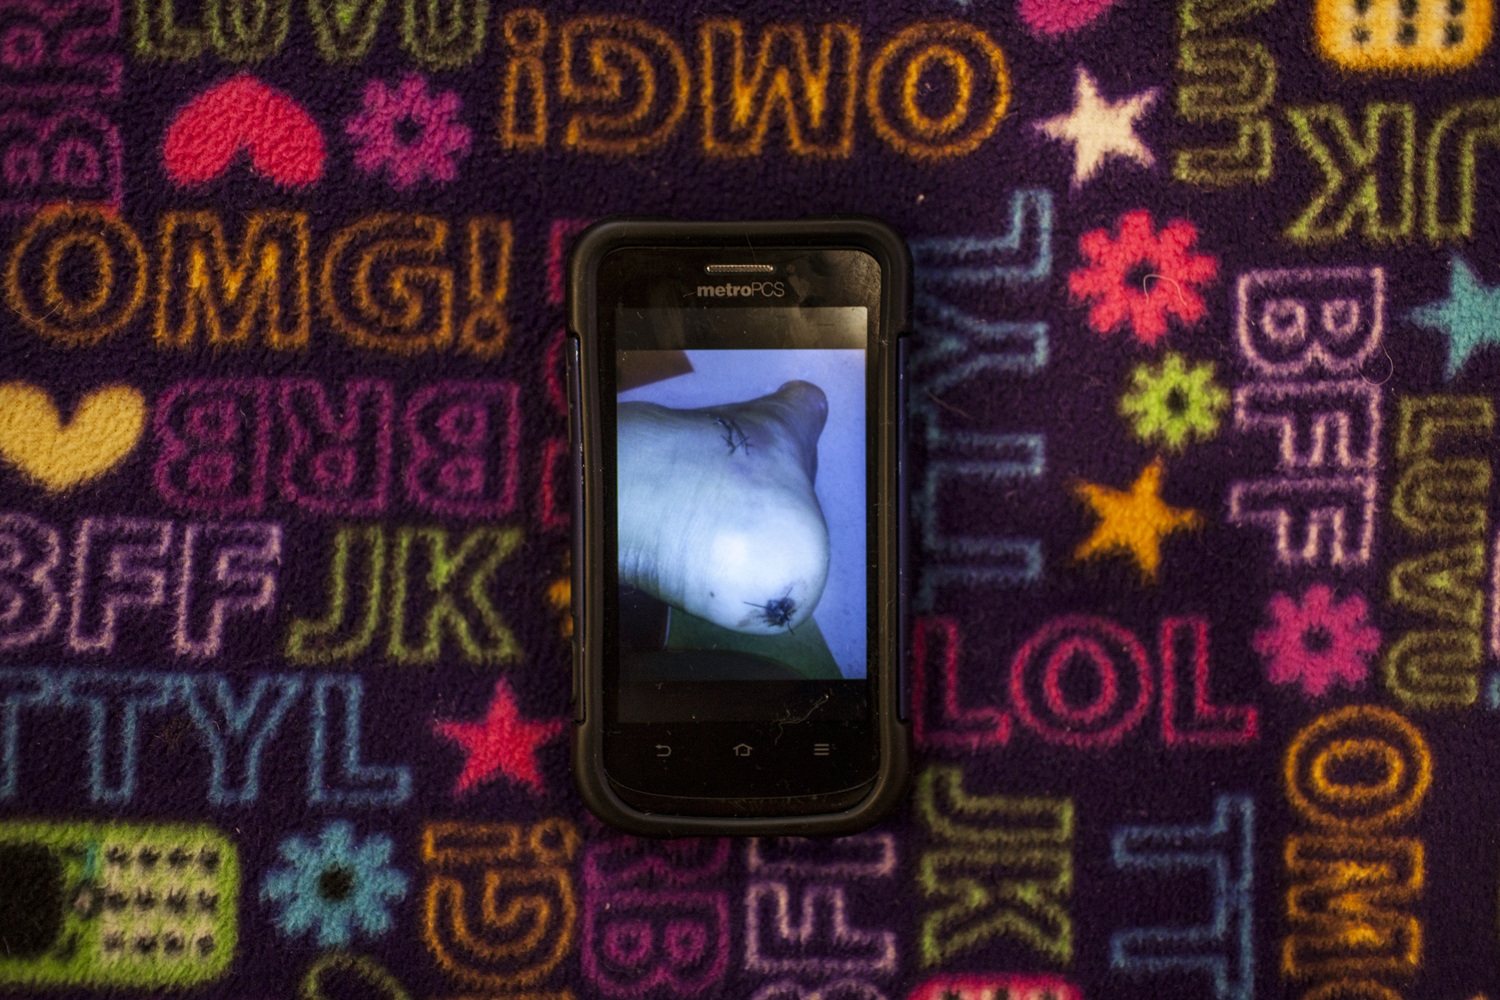 December 31, 2013. Sarah's cell phone sits on her text-message themed bed spread. On the phone is a photo she took of her swollen foot immediately after the bullet was removed. The bullet entered through the back of her heel and had to be removed through an incision in the side of her foot.